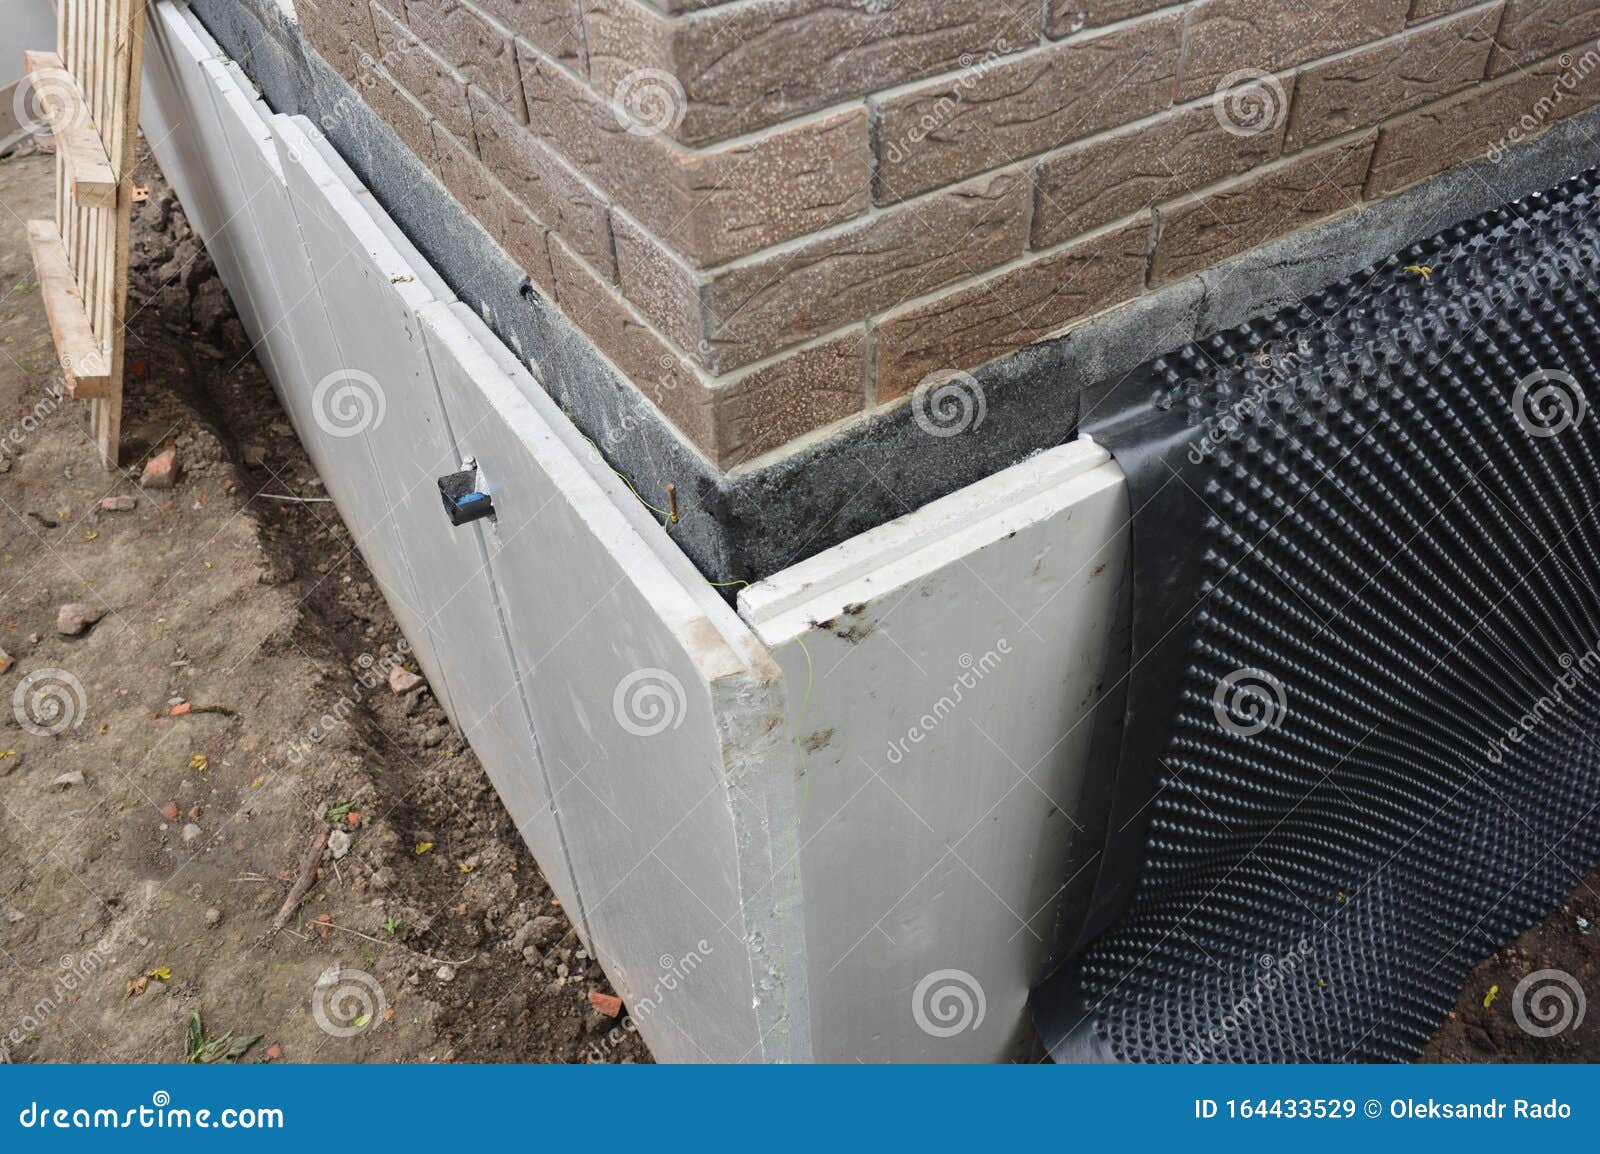 foundation insulation and damp proofing in problem corner area. house basement,foundation insulation details with waterproofing